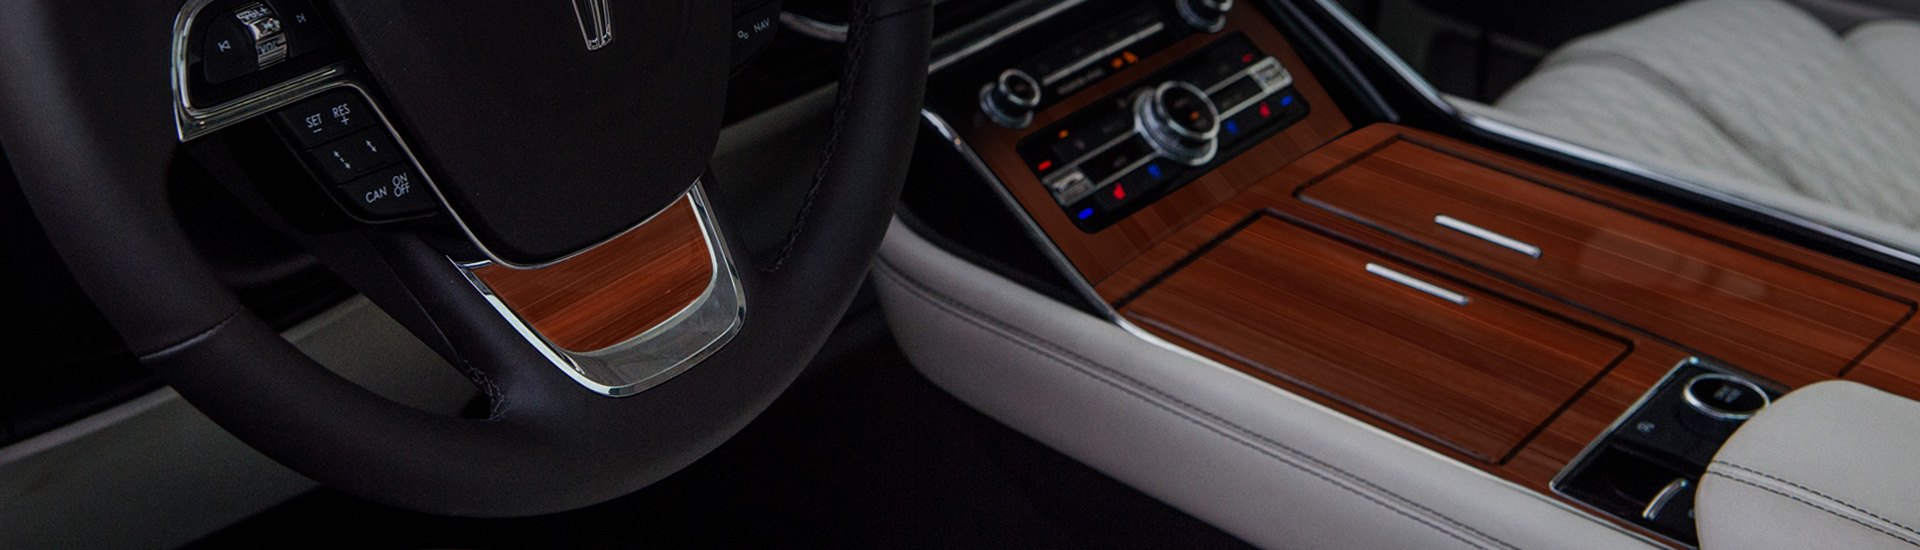 Spice Up The Interior Of Your 2018 Navigator With Premium B&I Wood Dash Kit